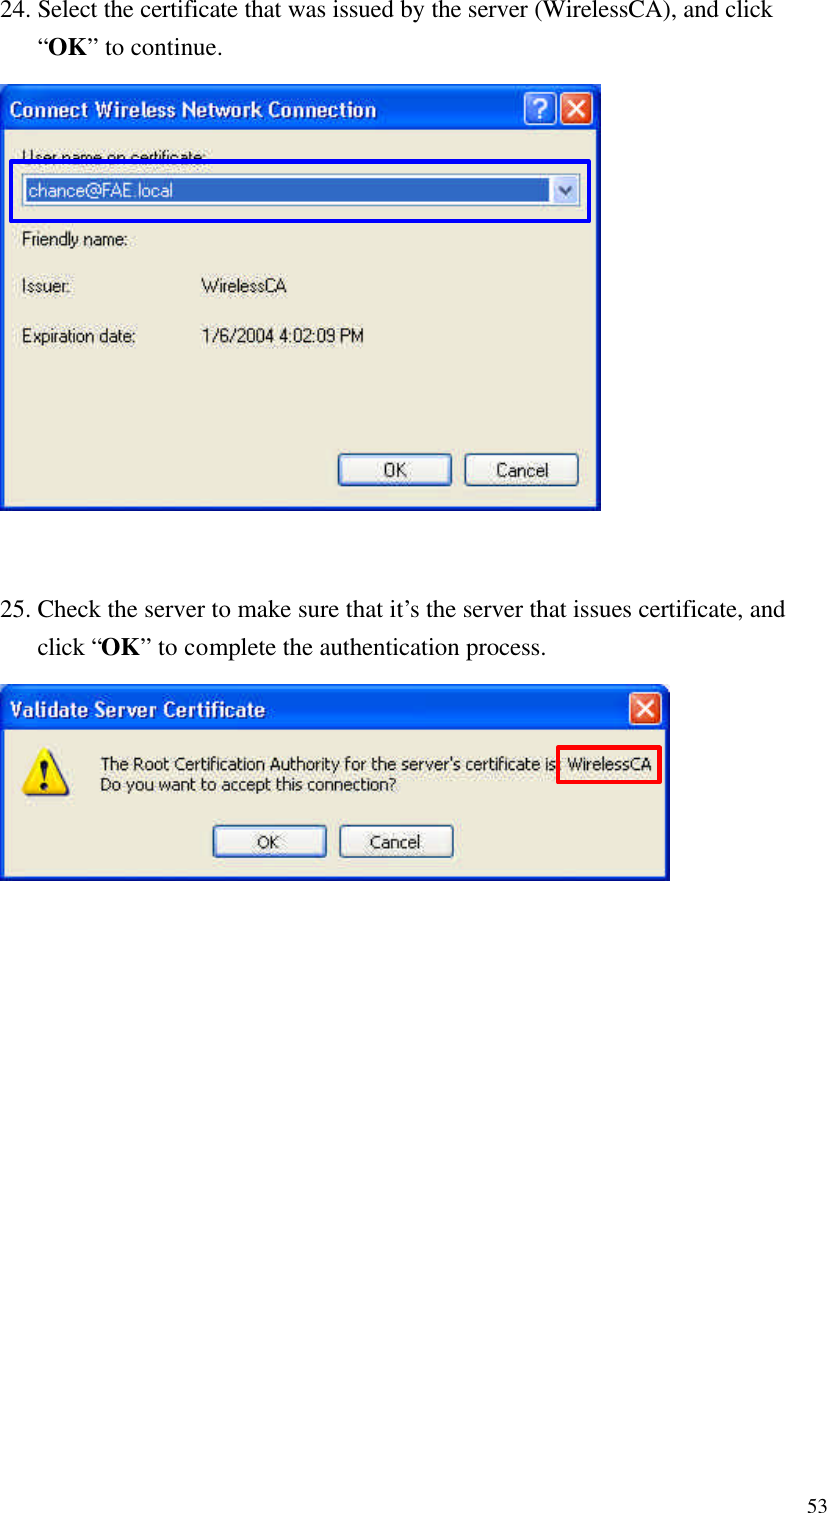  5324. Select the certificate that was issued by the server (WirelessCA), and click “OK” to continue.               25. Check the server to make sure that it’s the server that issues certificate, and click “OK” to complete the authentication process.                     